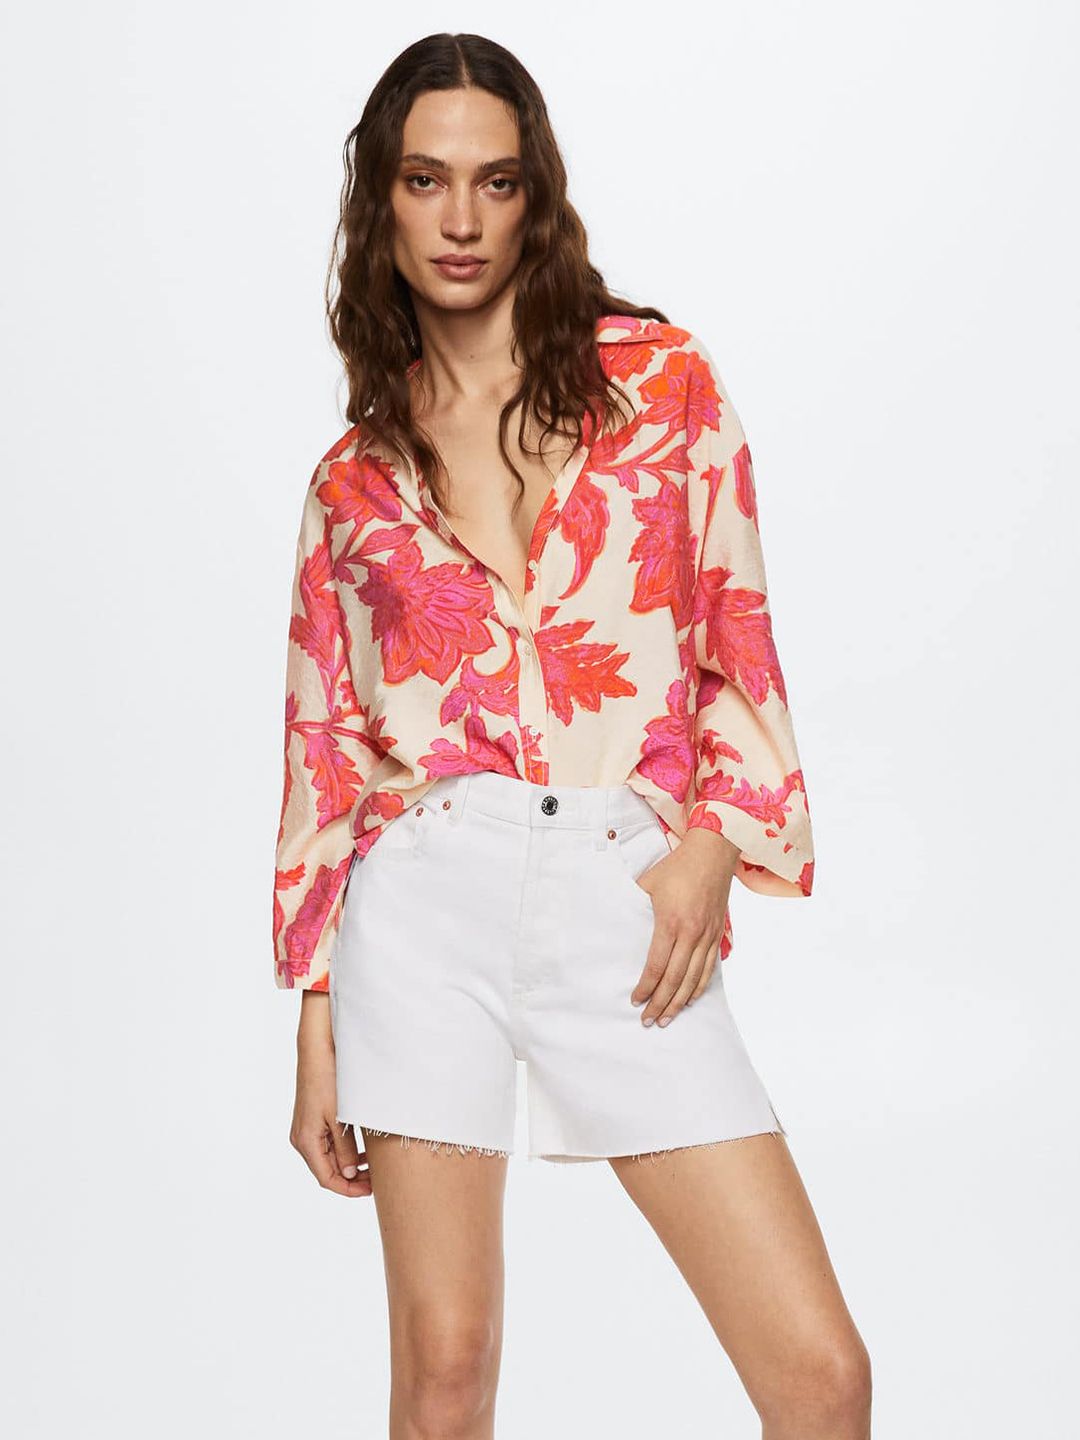 MANGO Women Cream-Coloured & Pink Floral Printed Casual Shirt Price in India